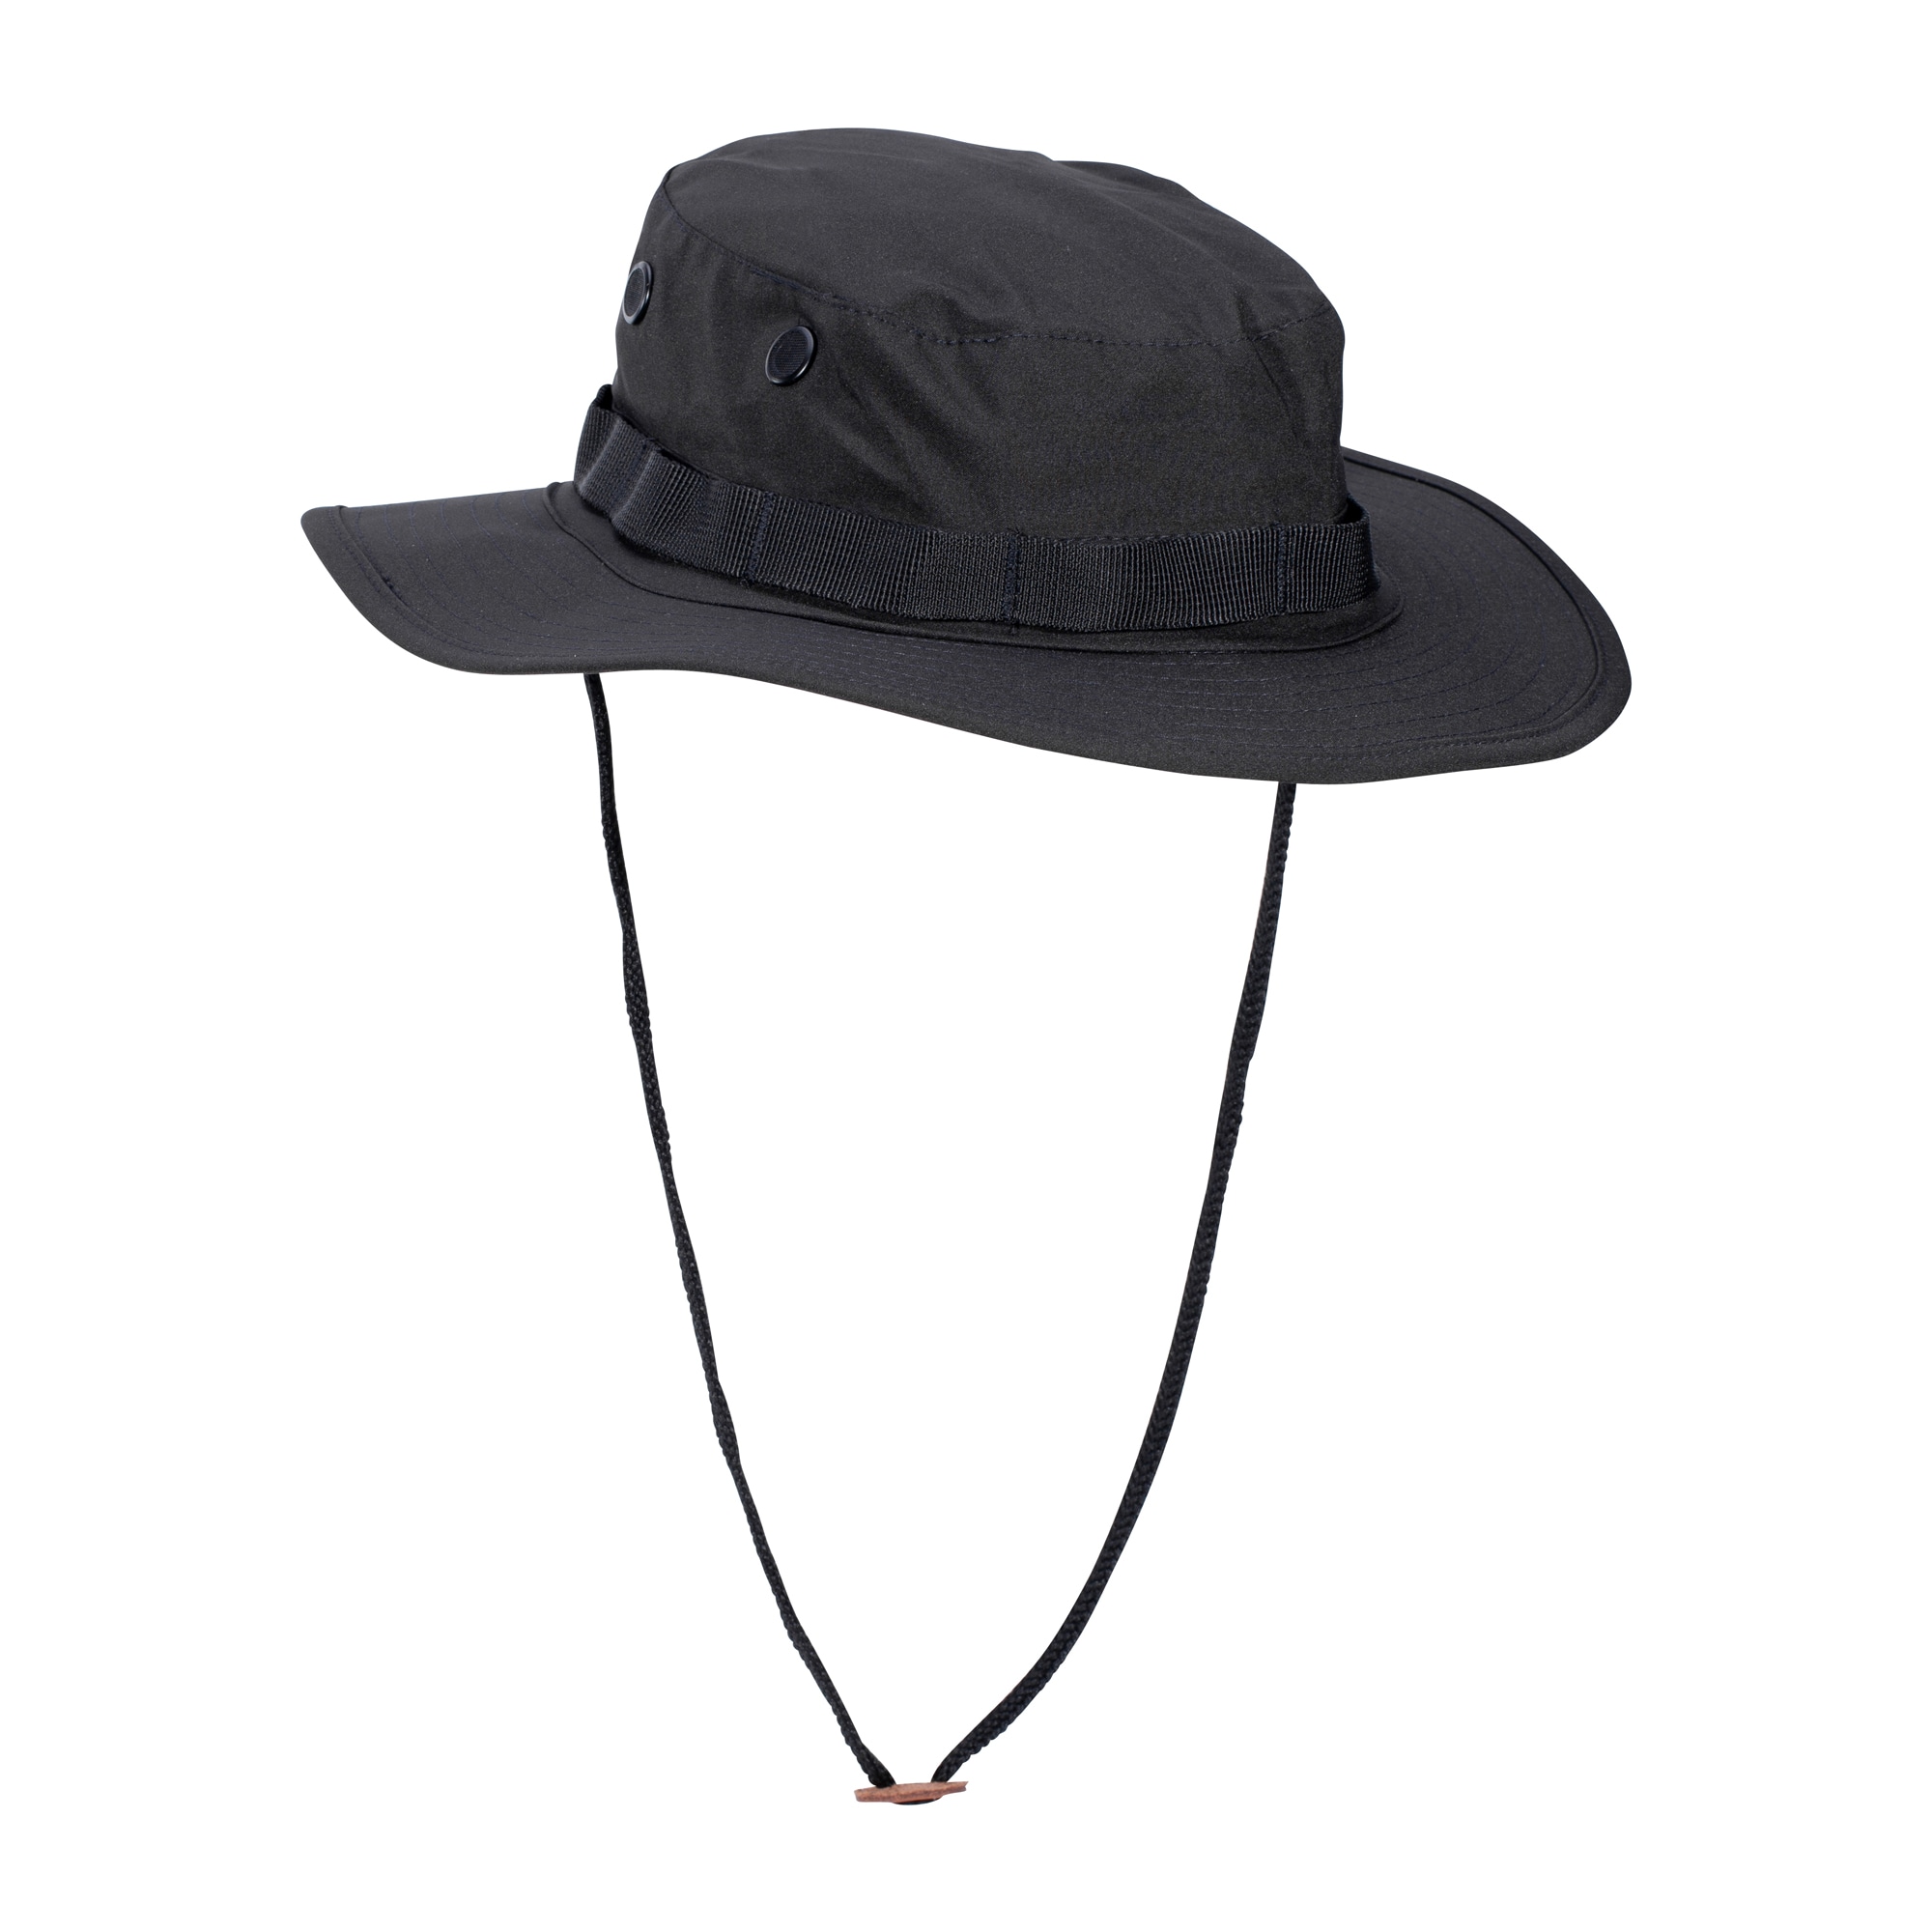 Purchase the Boonie Hat Trilaminat black by ASMC